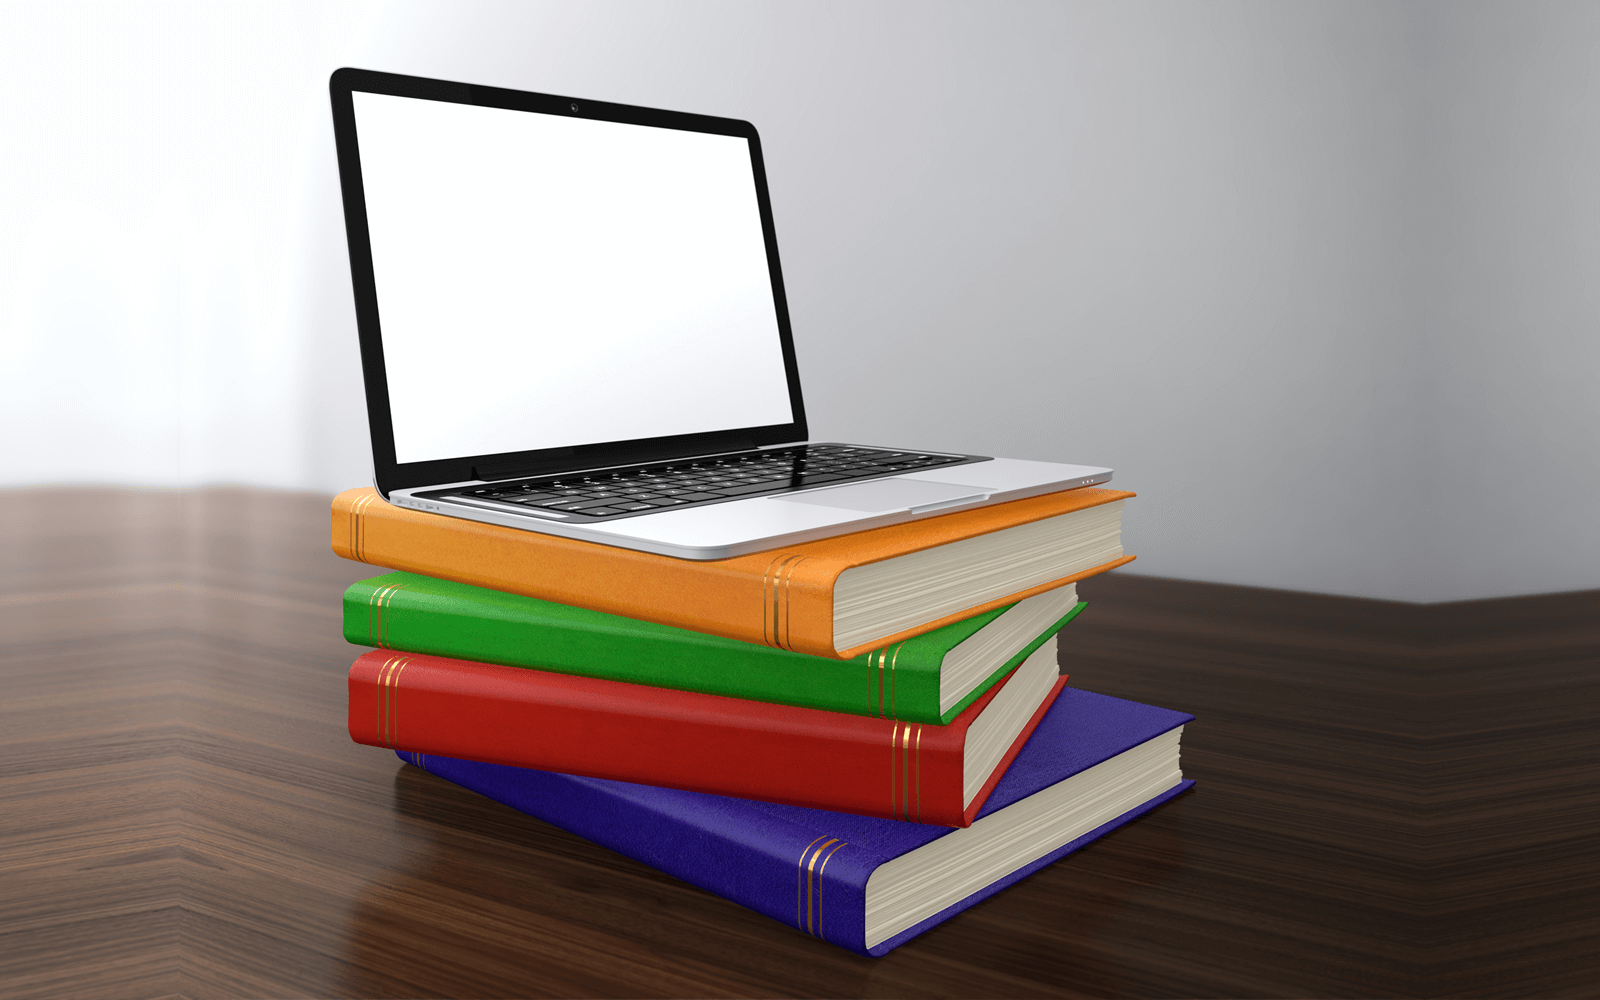 What Should You Know About Online ICAS Assessments?